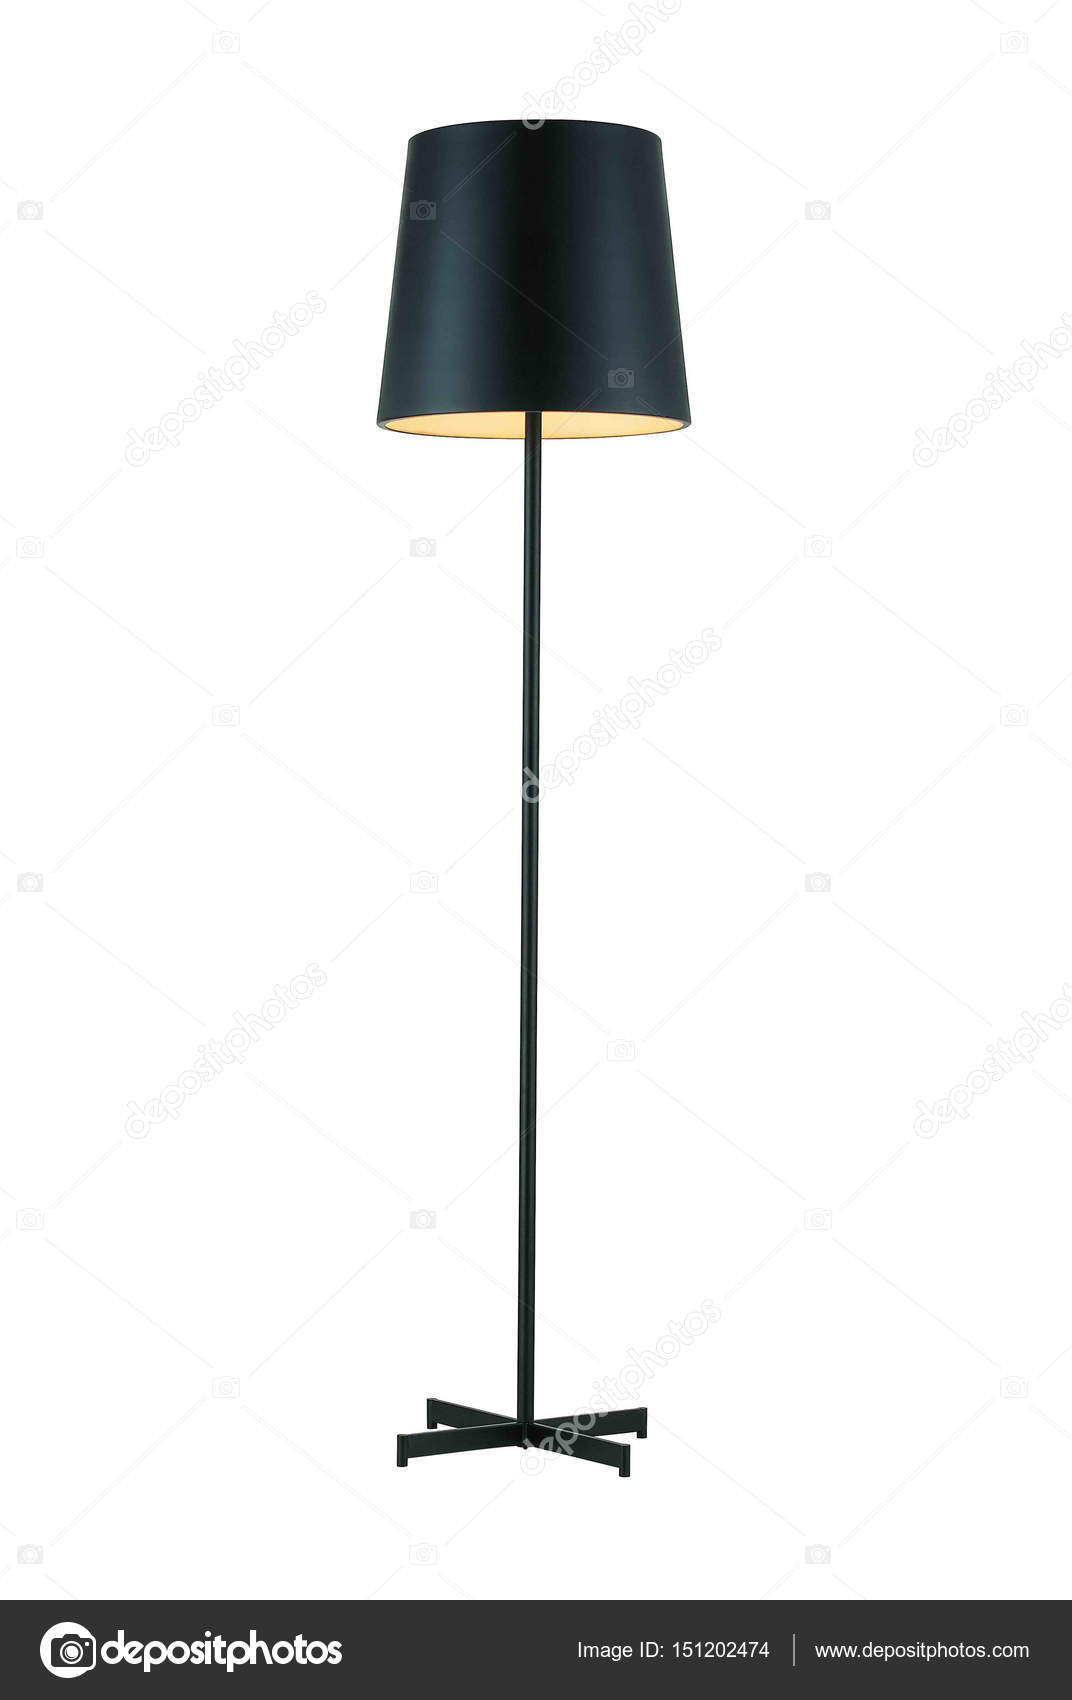 Black Tall Floor Lamp Stock Photo Tangducminh 151202474 within measurements 1072 X 1700